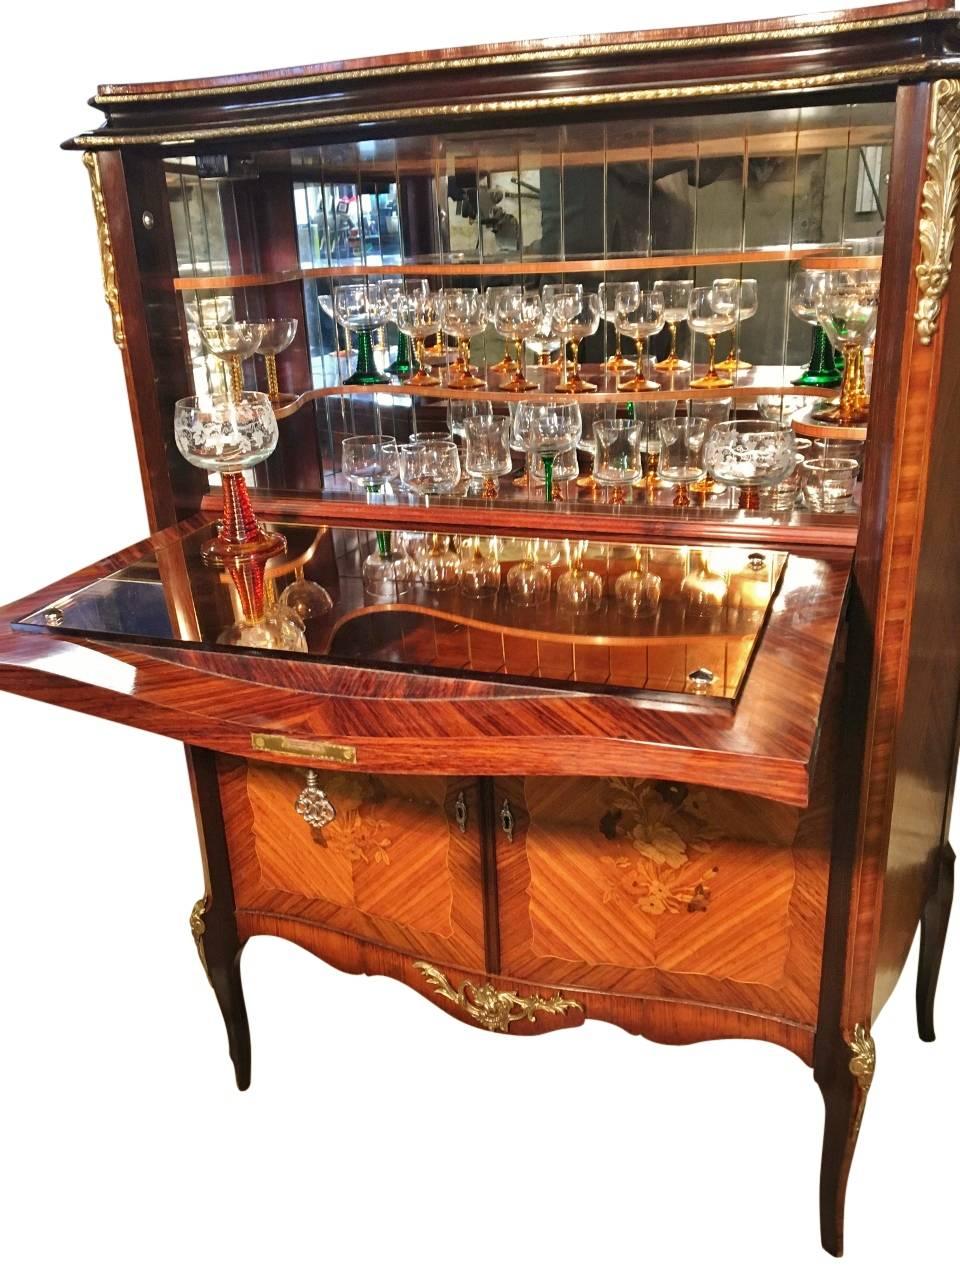 It's party time! Fabulous French tulip wood cocktail cabinet from the 1930s fully equipped with attractive stemmed glasses. well maintained by former owners, this cocktail cabinet is offered in excellent showroom condition.

This delightful cabinet,